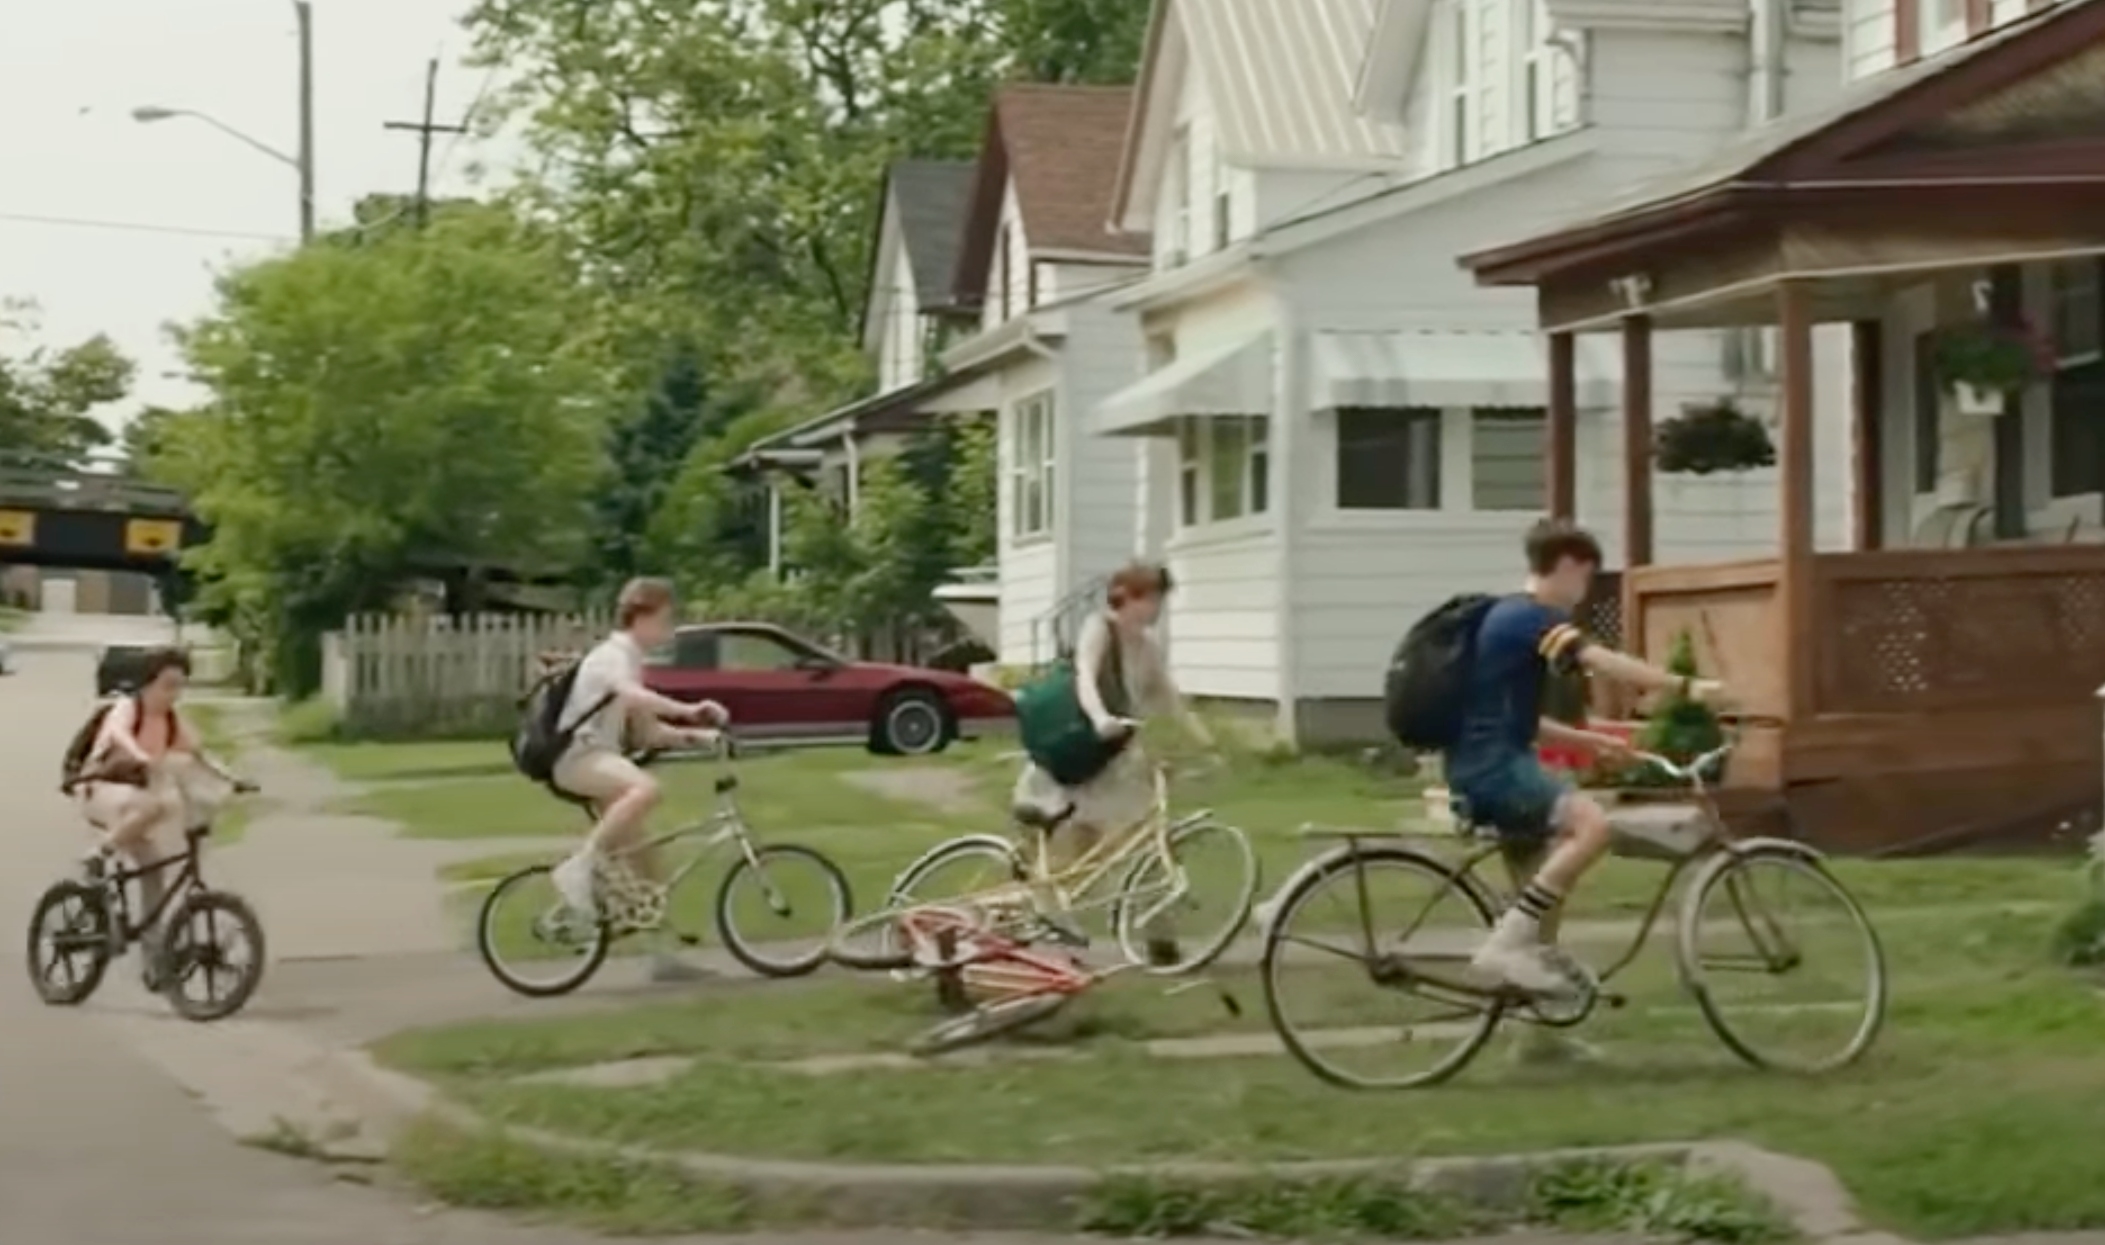 The Loser Club from the movie &quot;It&quot; are riding their bicycles